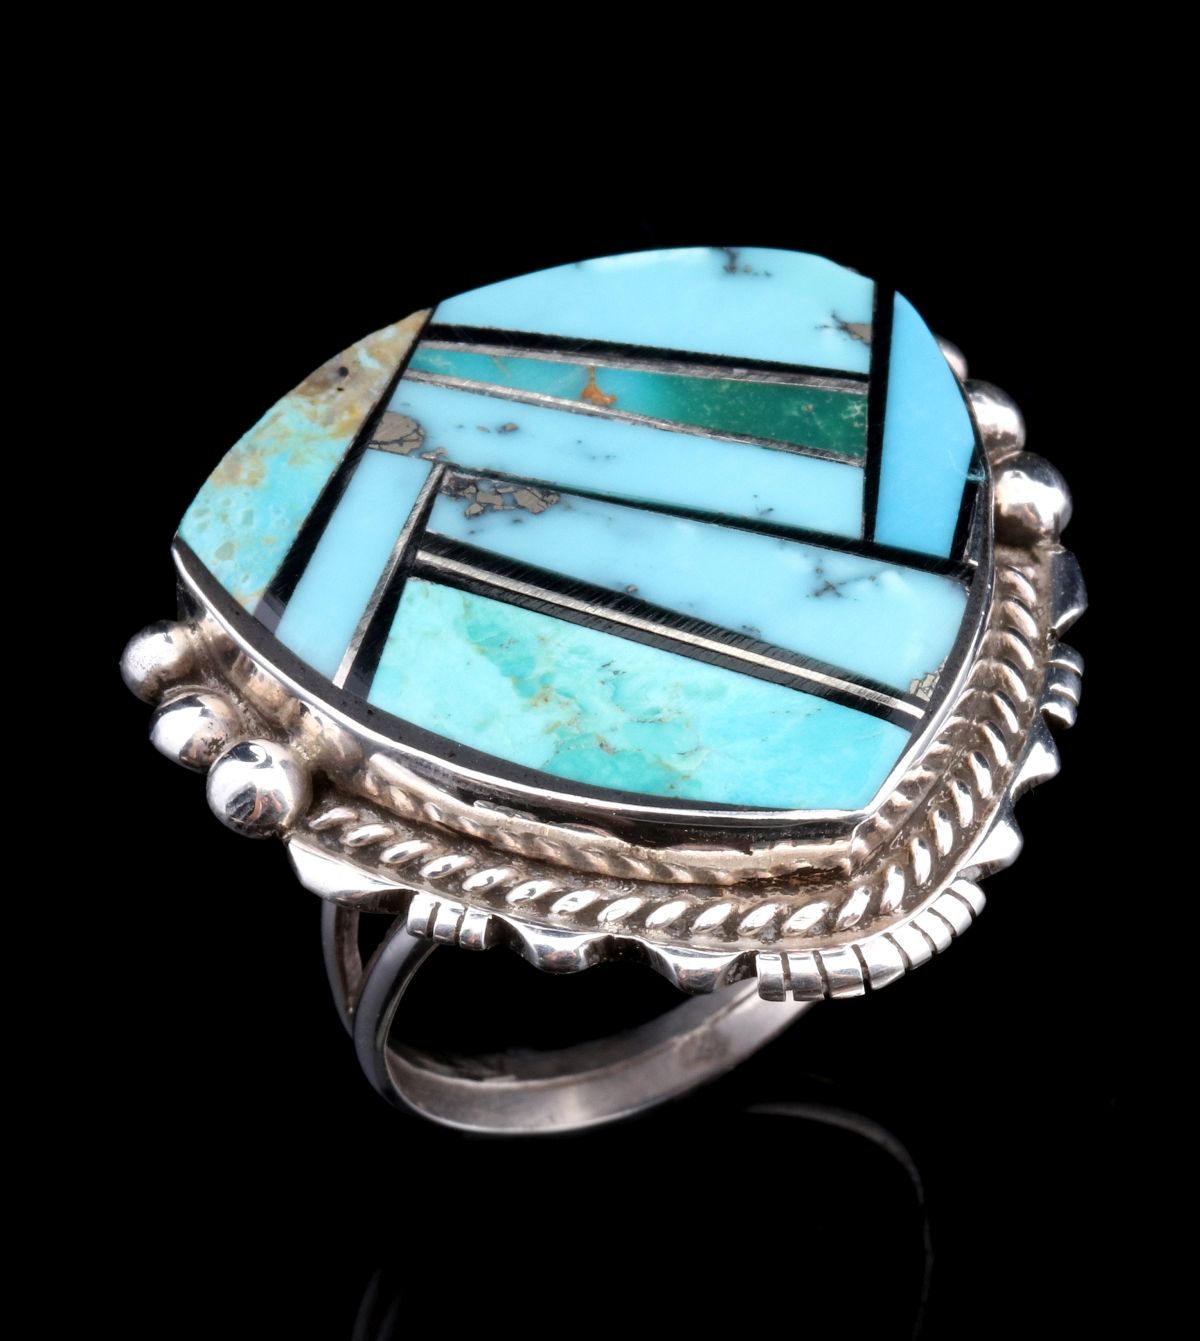 A ZUNI STERLING SILVER RING WITH SEMIPRECIOUS INLAYS